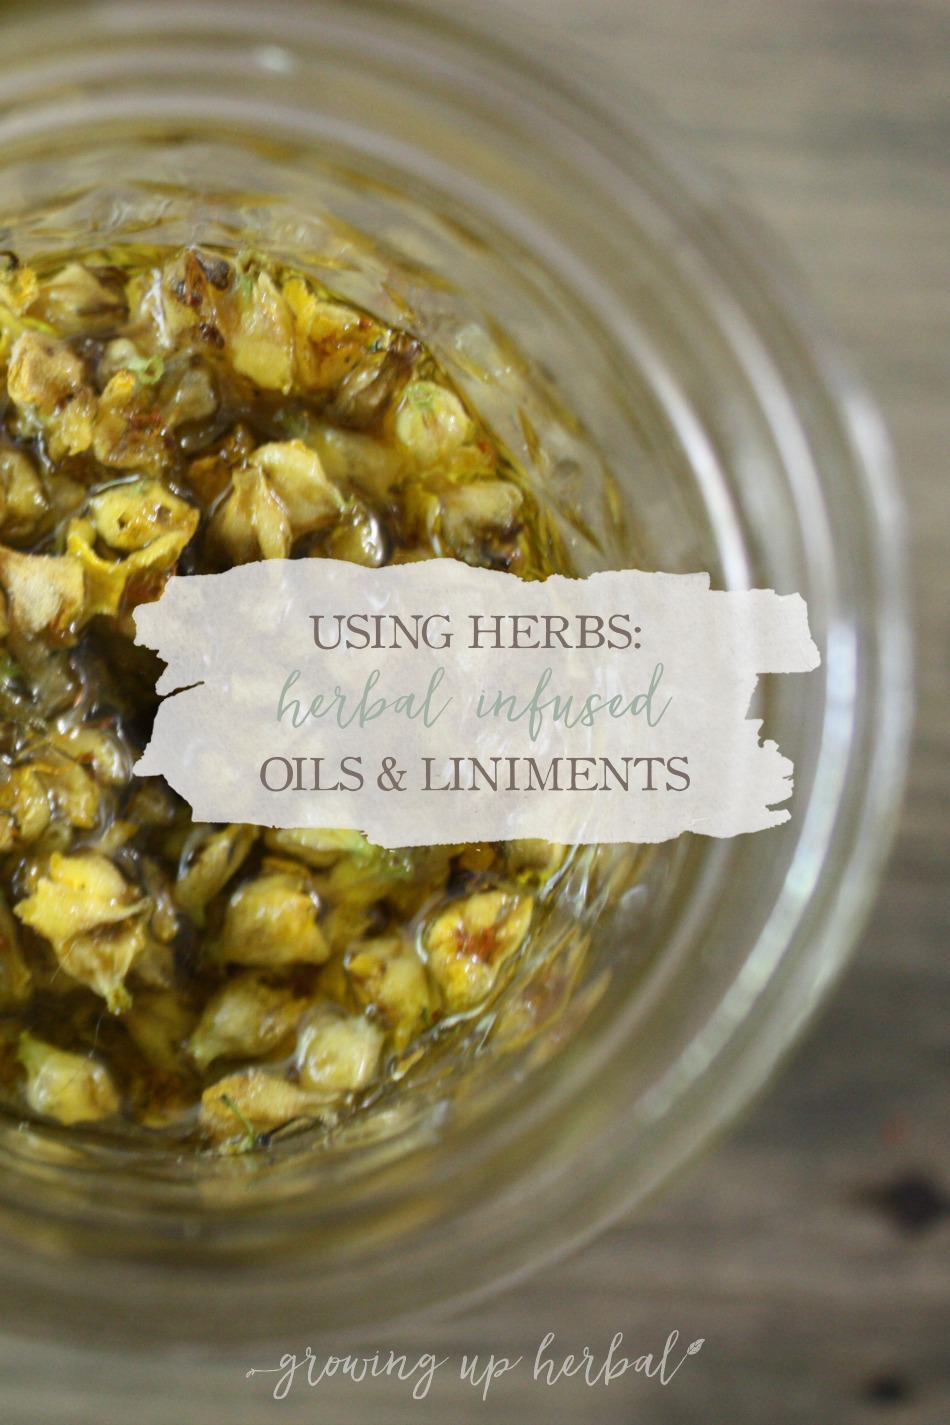 Using Herbs: Herbal Infused Oils and Liniments | Growing Up Herbal | Herbal infused oils and liniments are two easy to make preparations that have lots of great uses!